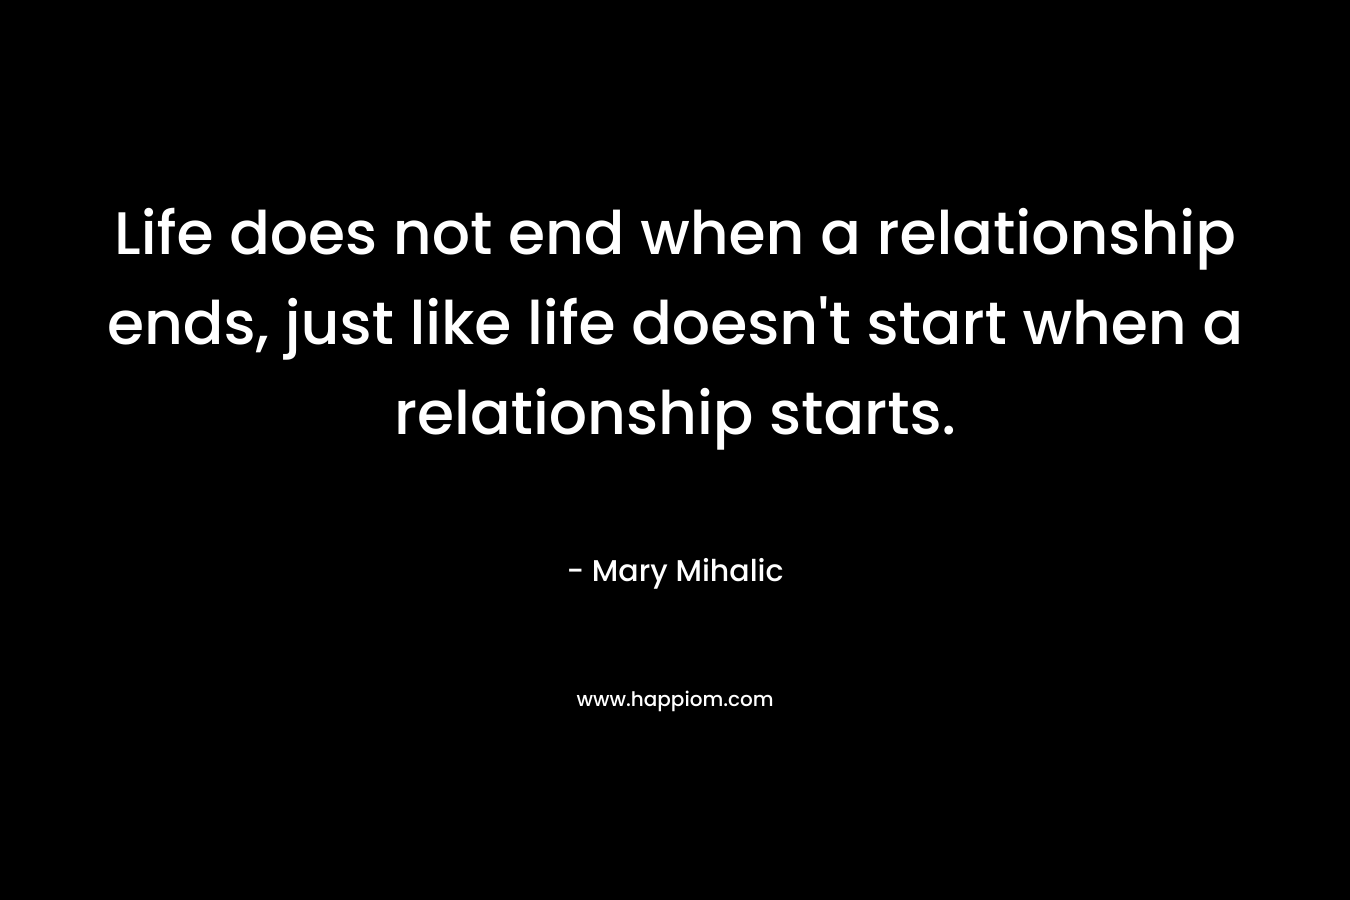 Life does not end when a relationship ends, just like life doesn’t start when a relationship starts. – Mary Mihalic